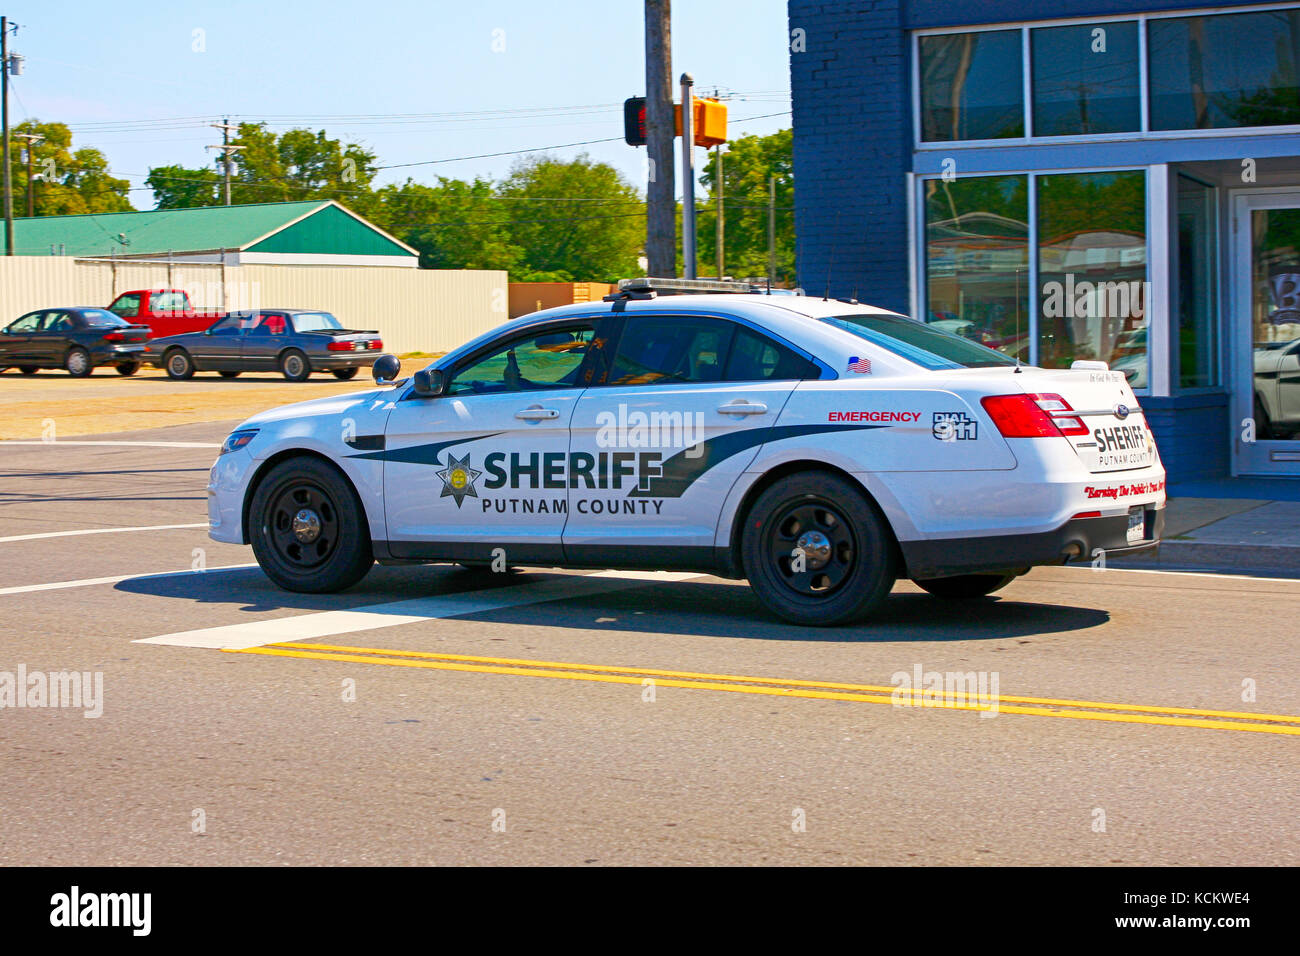 Local sheriff vehicle from Putnam County in Lebanon TN, USA Stock Photo